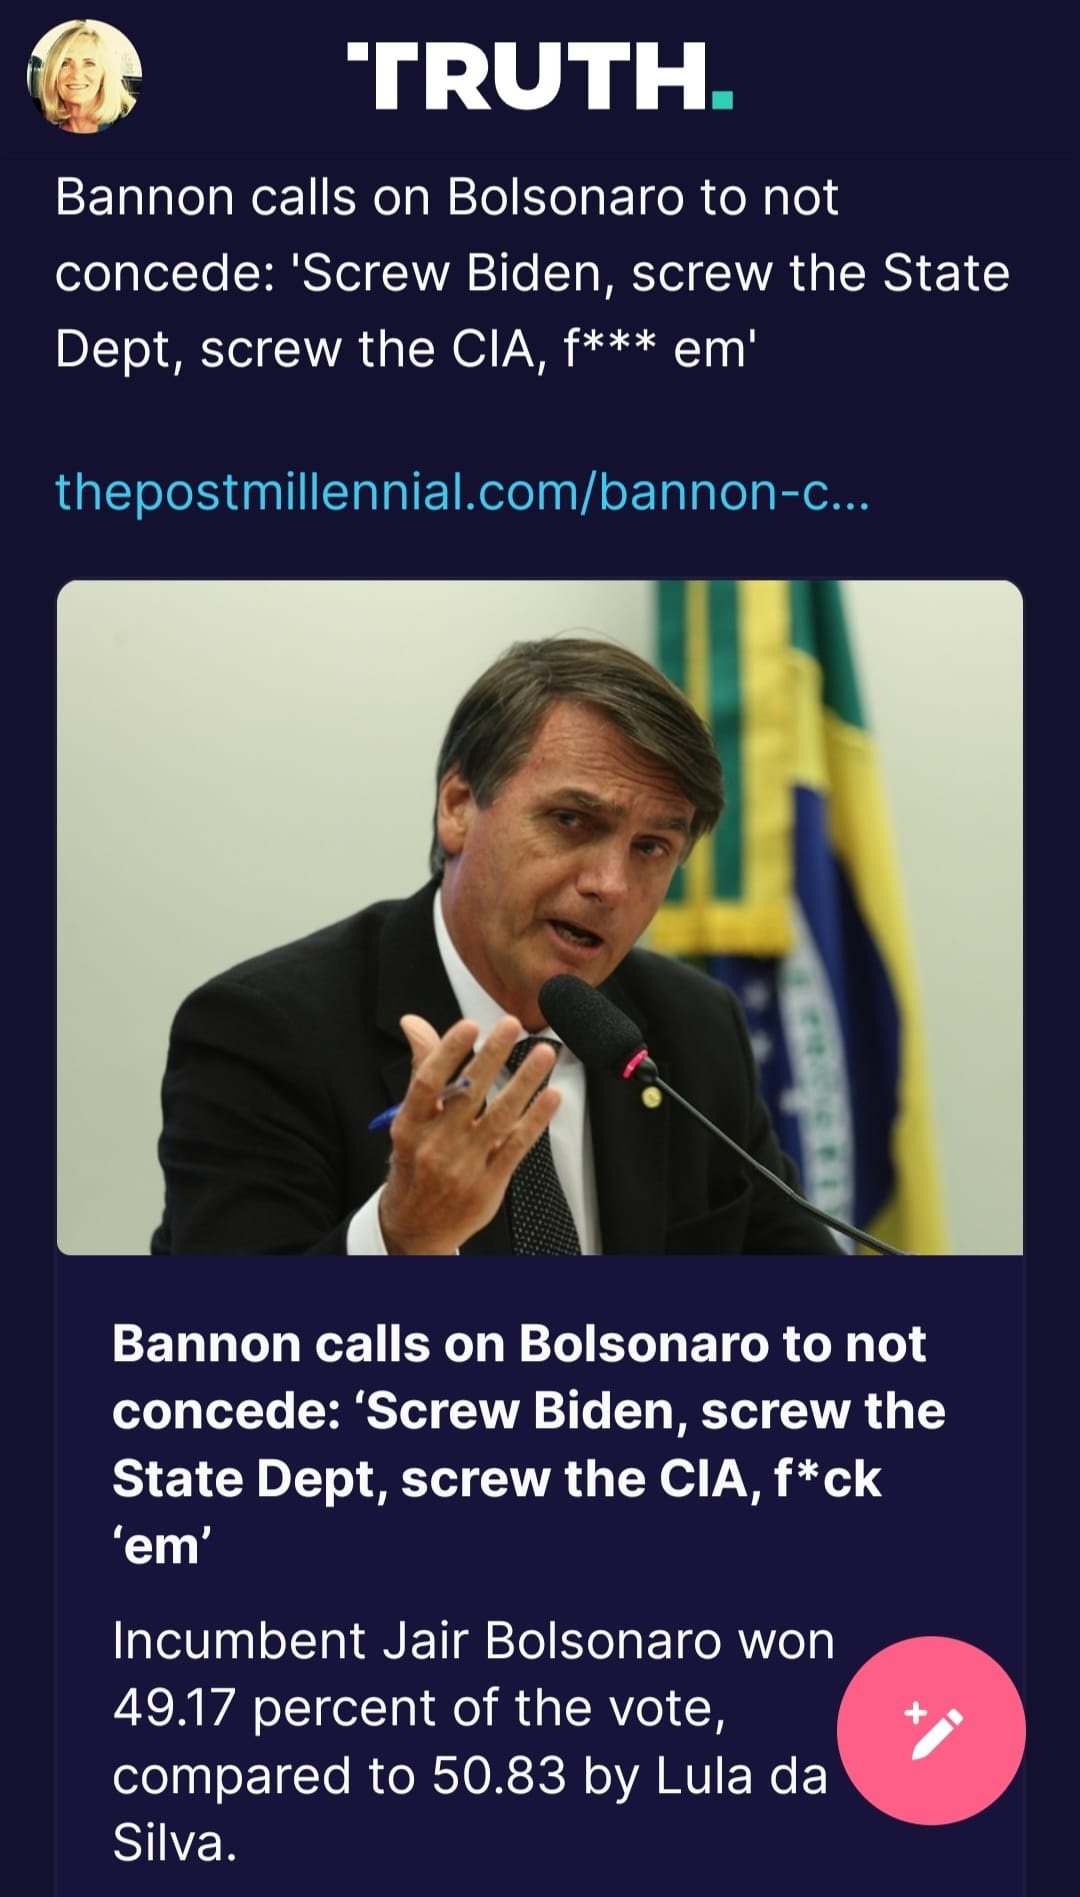 May be an image of 1 person and text that says 'TRUTH. Bannon calls on Bolsonaro to not concede: 'Screw Biden, screw the State Dept, screw the CIA, f*** em thepostmillennial.com/bannon-... Bannon calls on Bolsonaro to not concede: Screw Biden, screw the State Dept, screw the CIA, f*ck 'em' Incumbent Jair Bolsonaro won 49.17 percent of the vote, compared to 50.83 by Lula da Silva.'